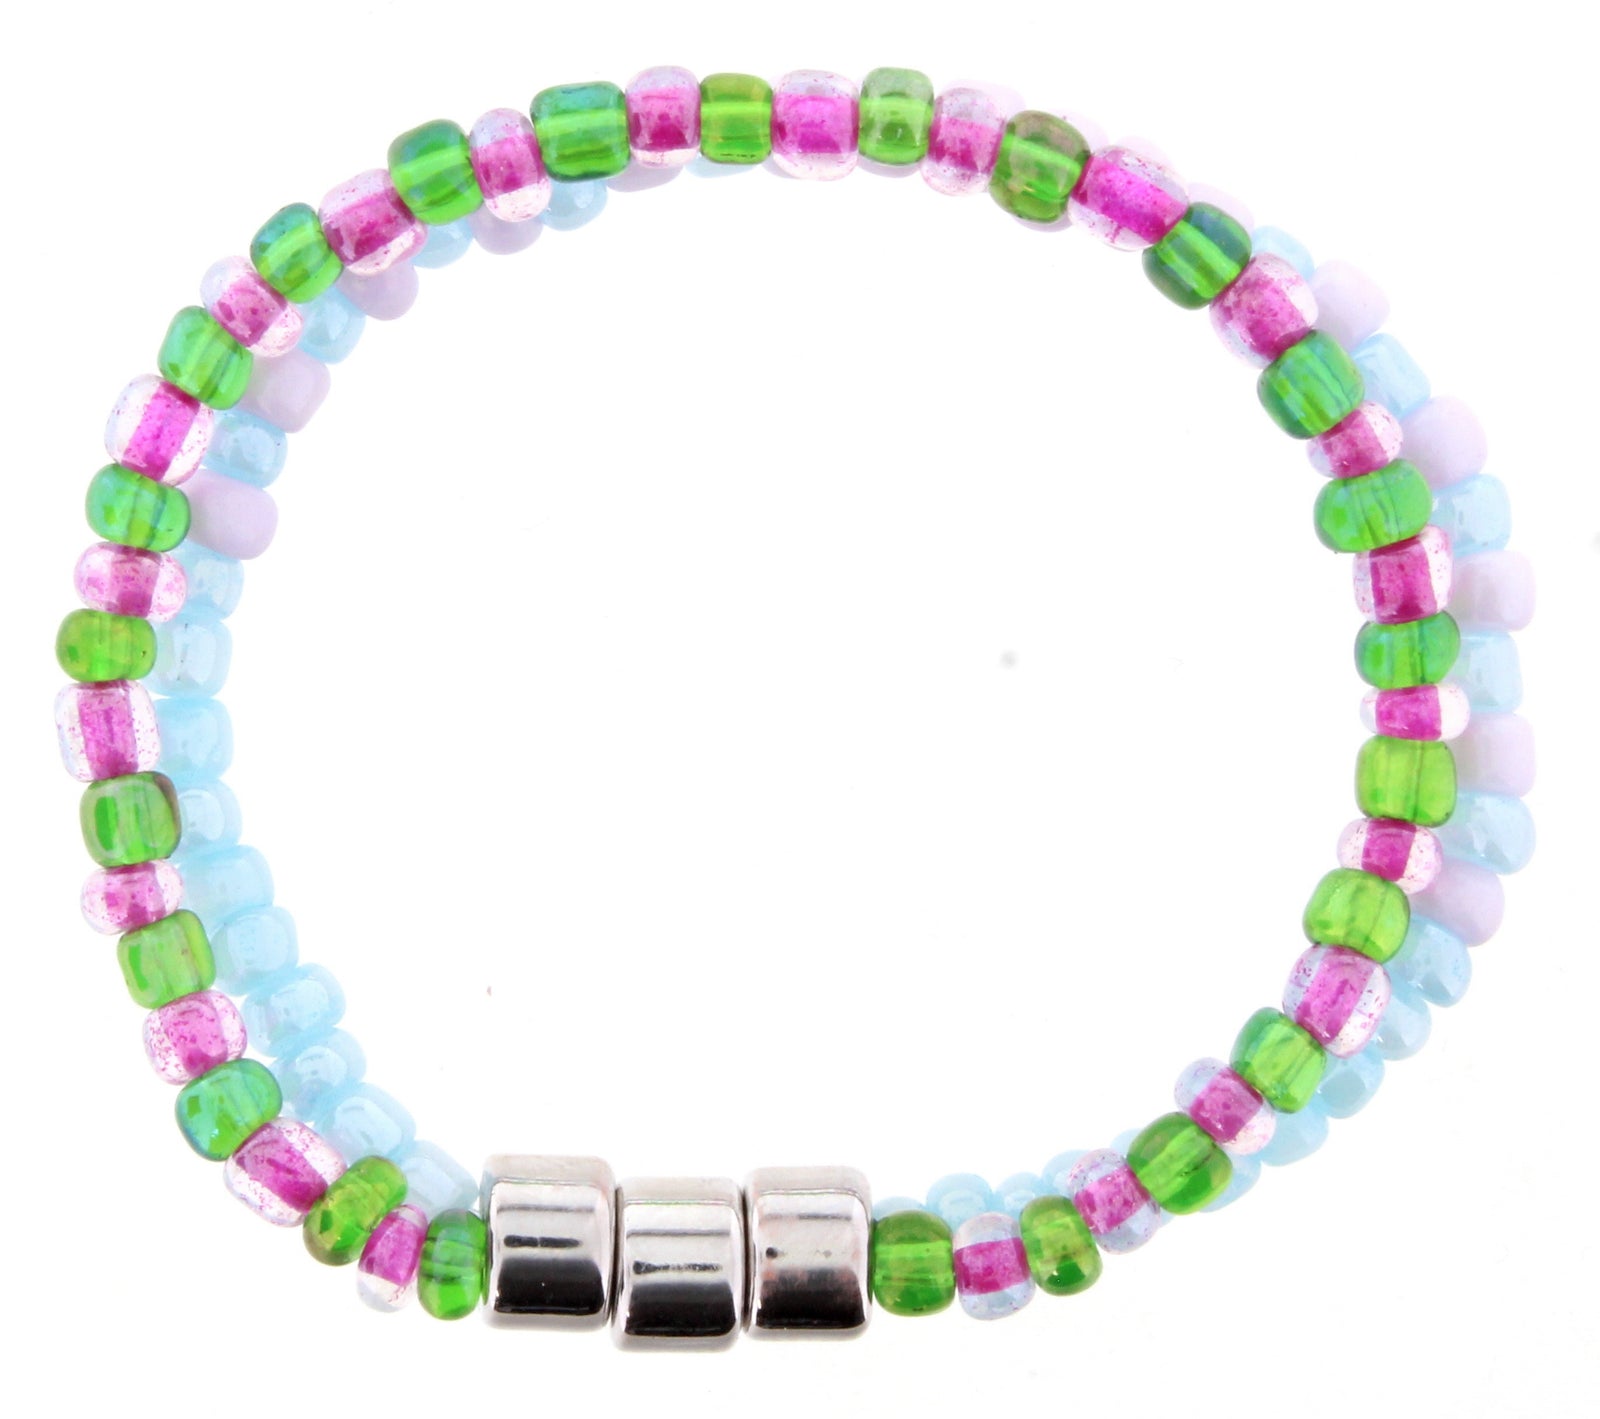 Kids' Kaleidoscope Bracelet- Pink/Green with White/Blue Beads and Silver Spacers